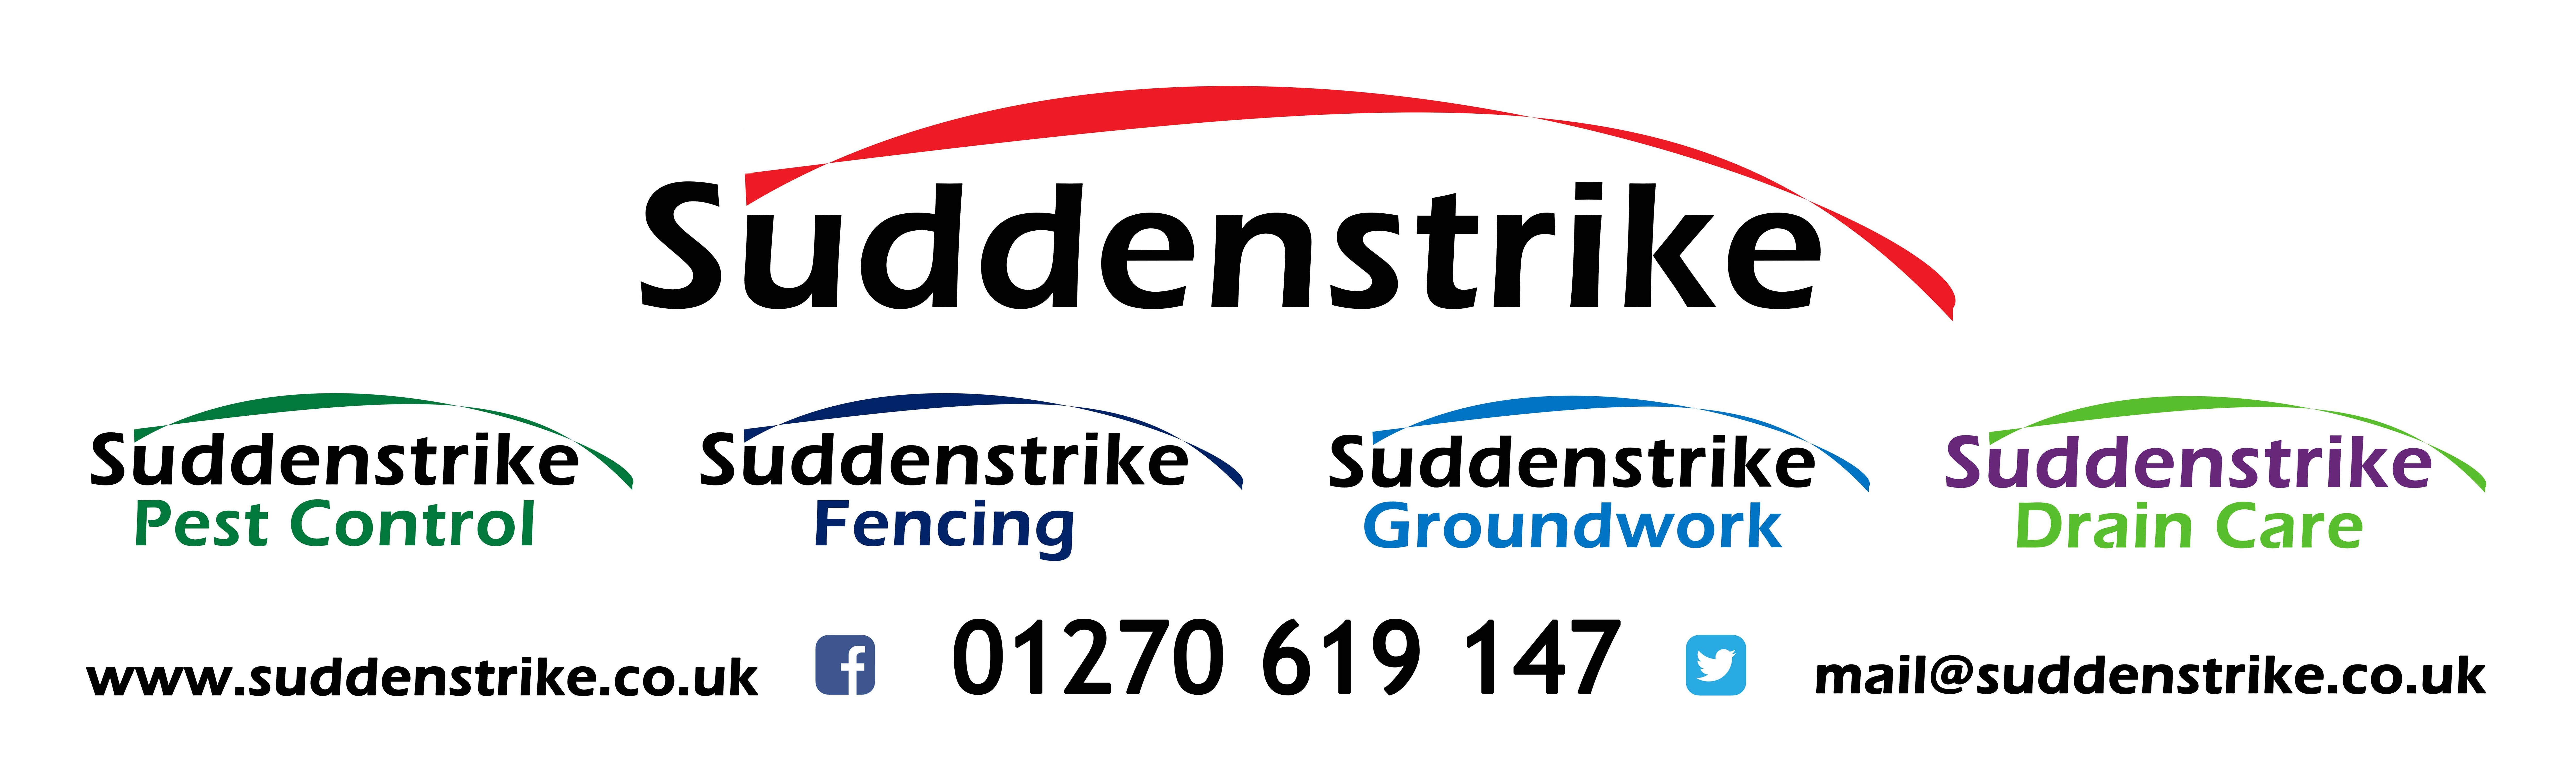 Suddenstrike logos and contact banner for Nantwich Show 2018